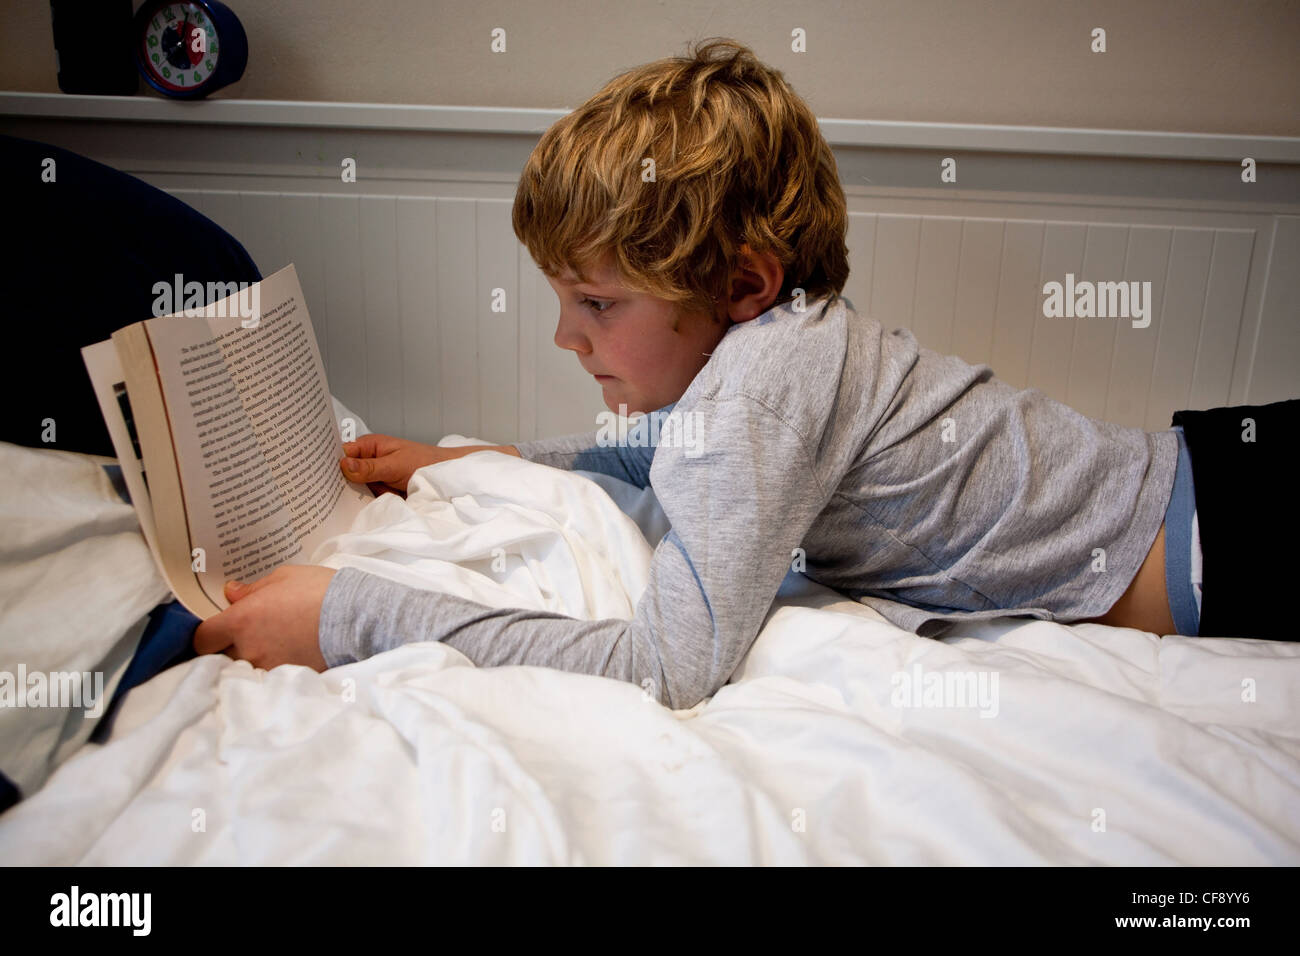 a young boy reading a book in his bedroom Stock Photo